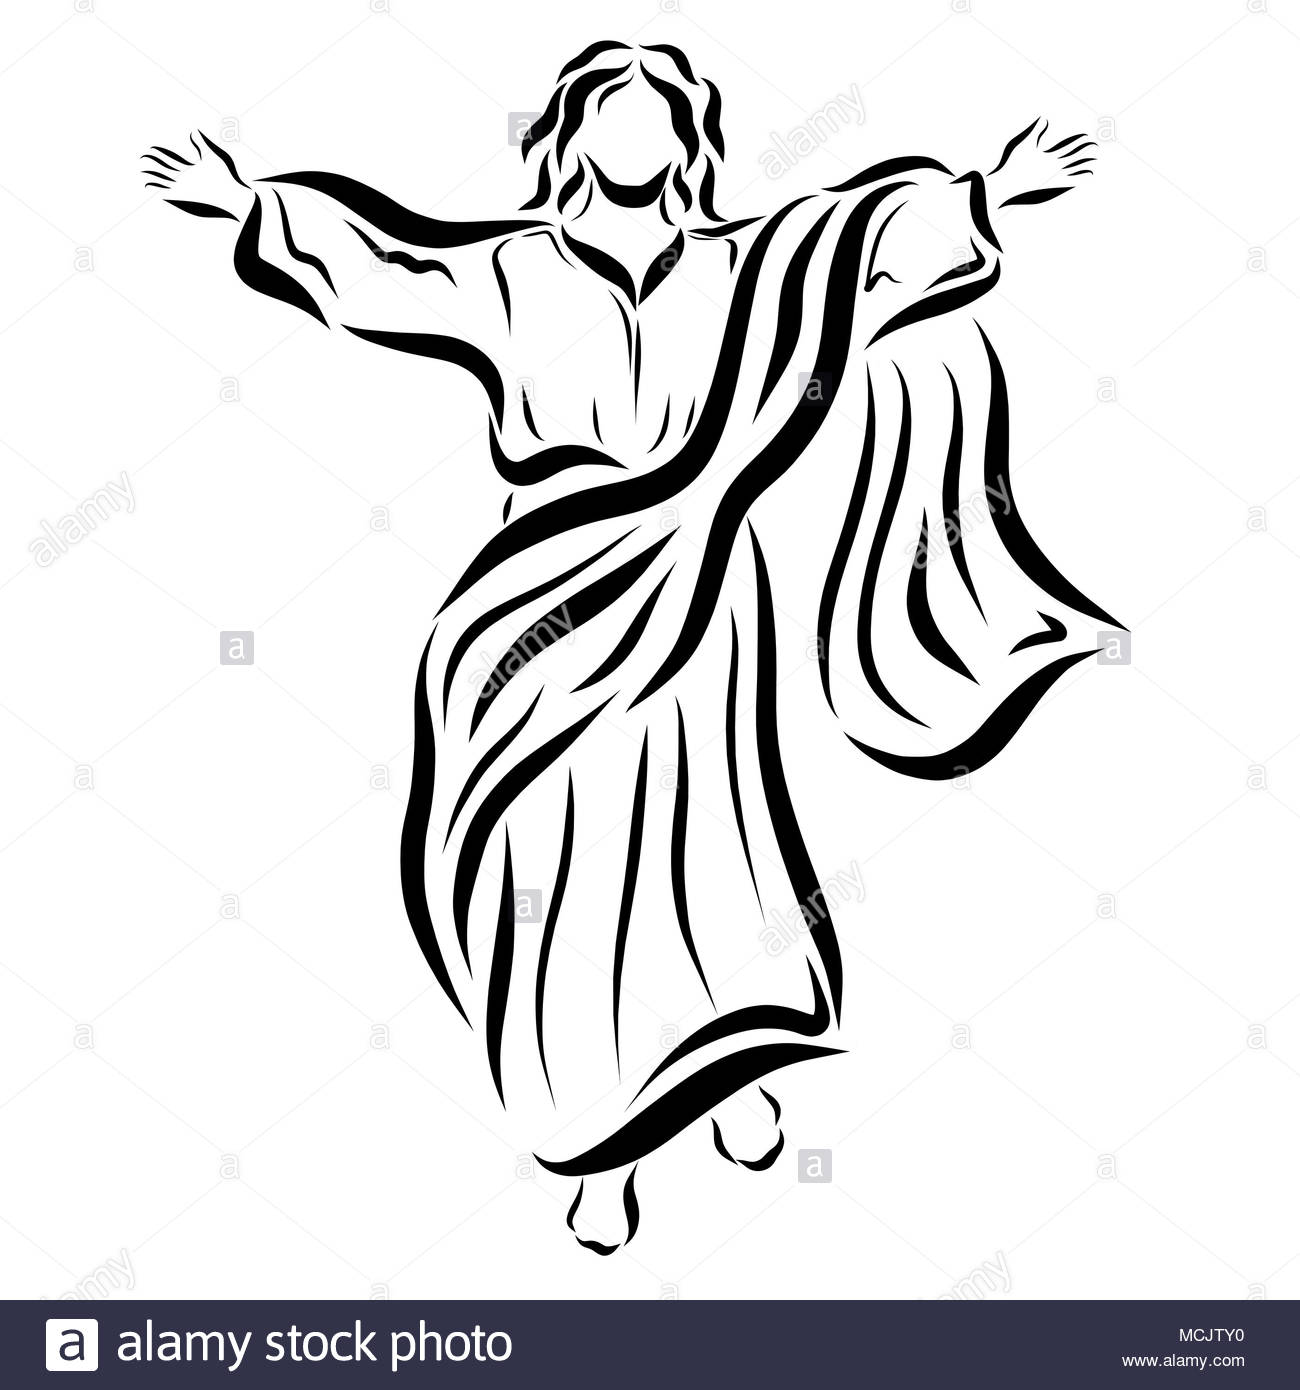 Ascension Of Jesus Black and White Stock Photos & Images - Alamy